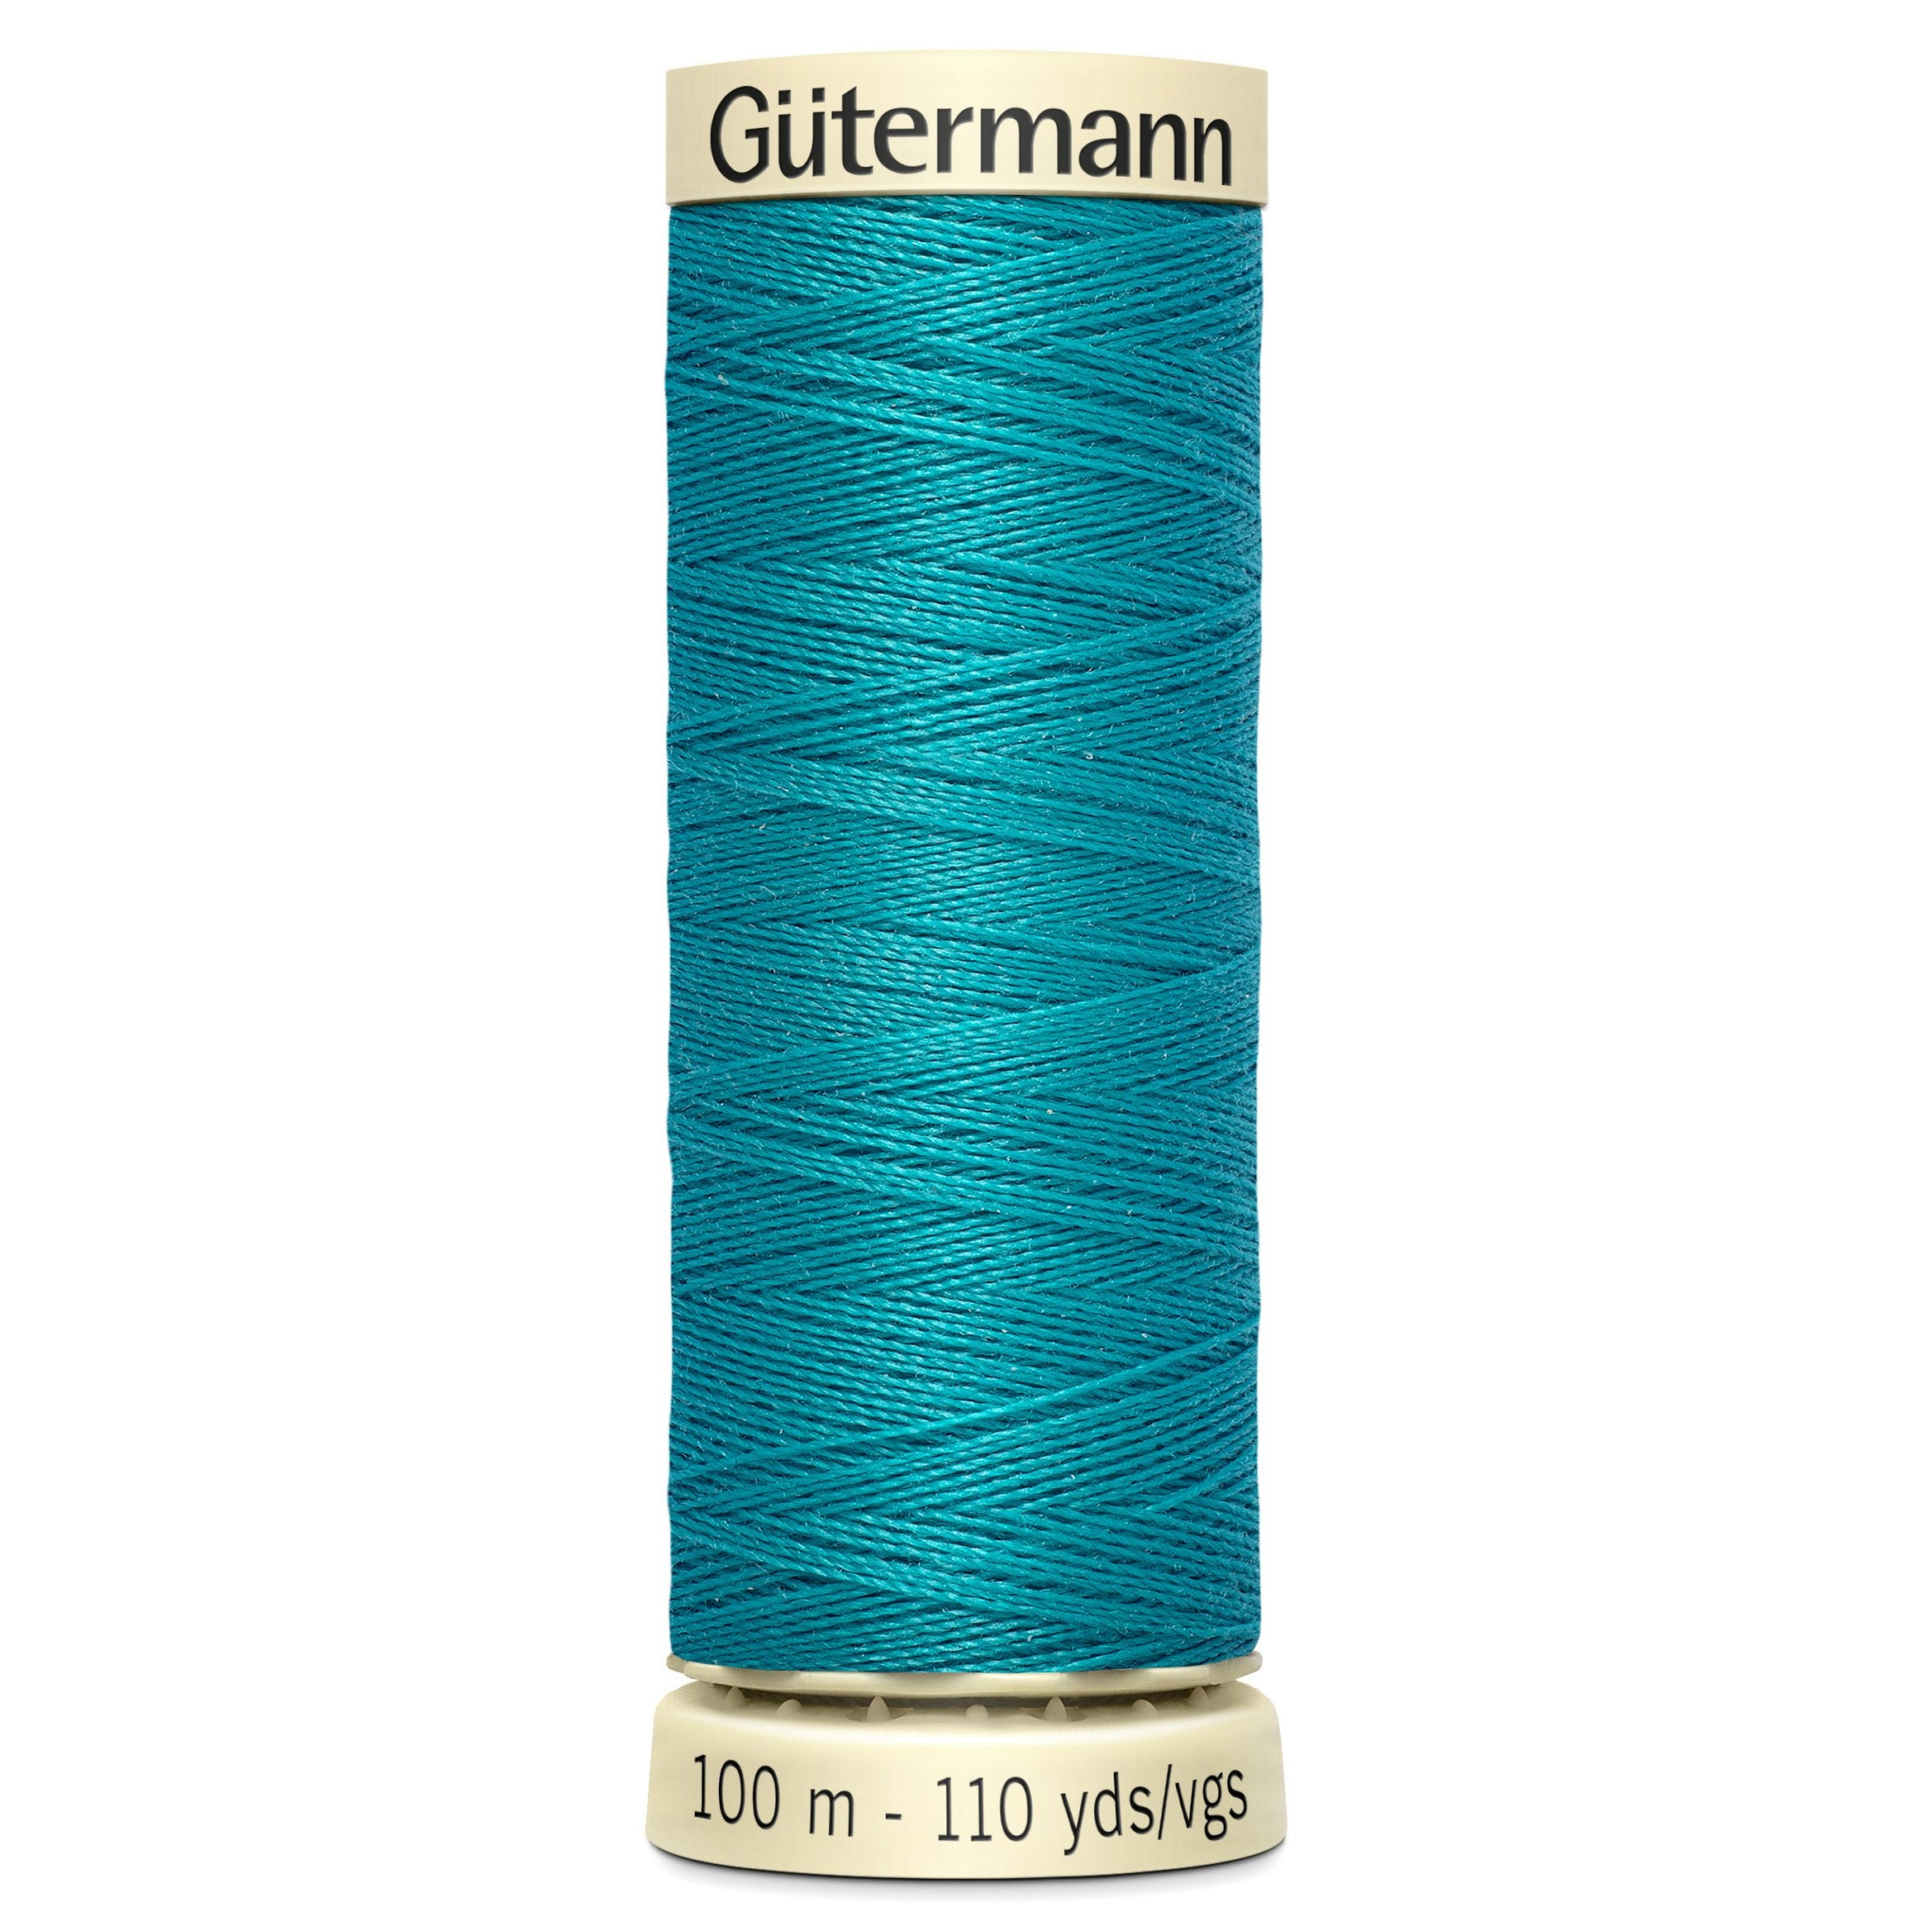 Gutermann Sew All Thread colour 55 Turquoise from Jaycotts Sewing Supplies